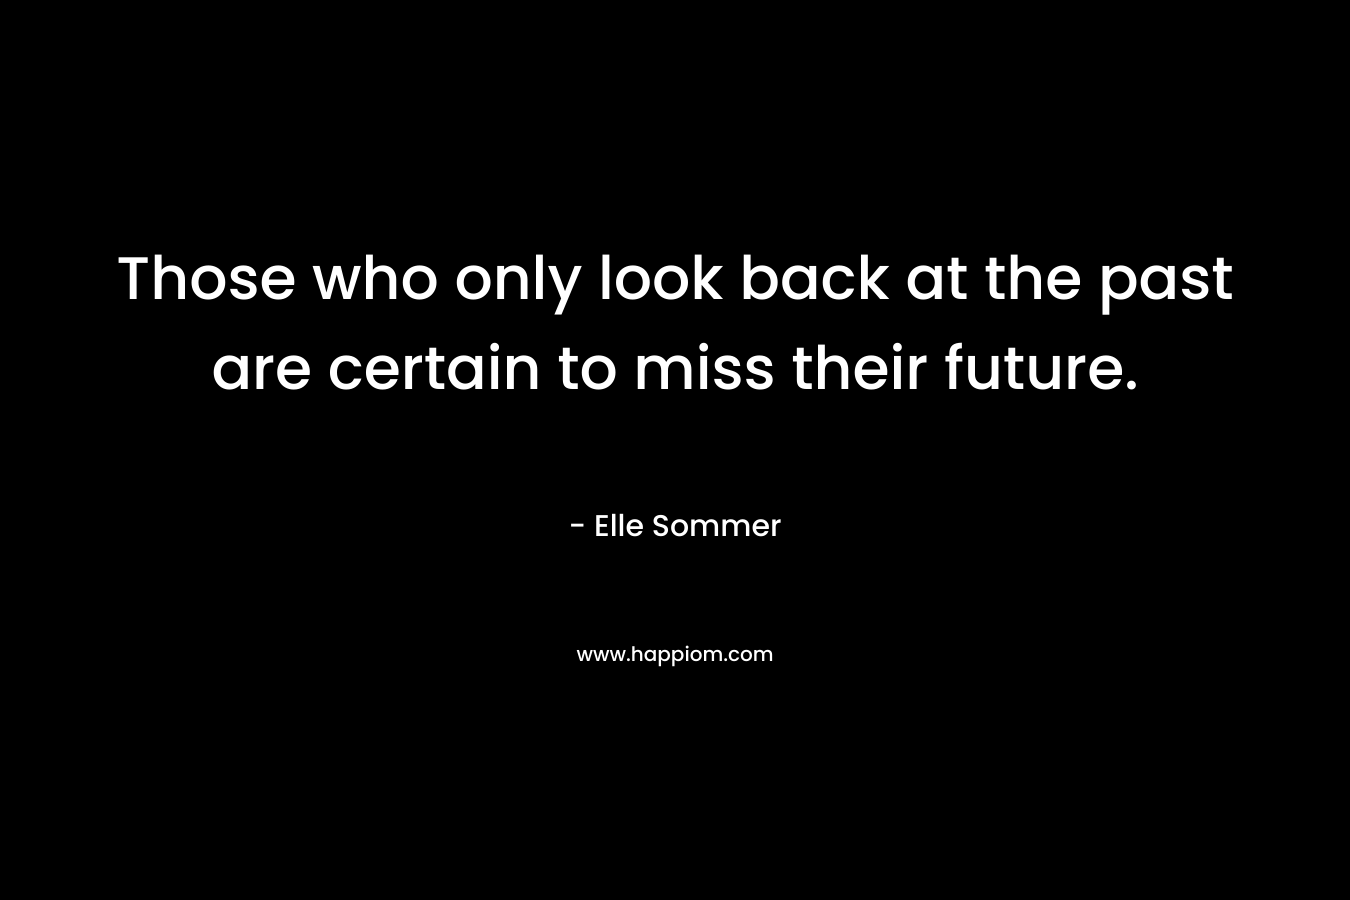 Those who only look back at the past are certain to miss their future. – Elle Sommer